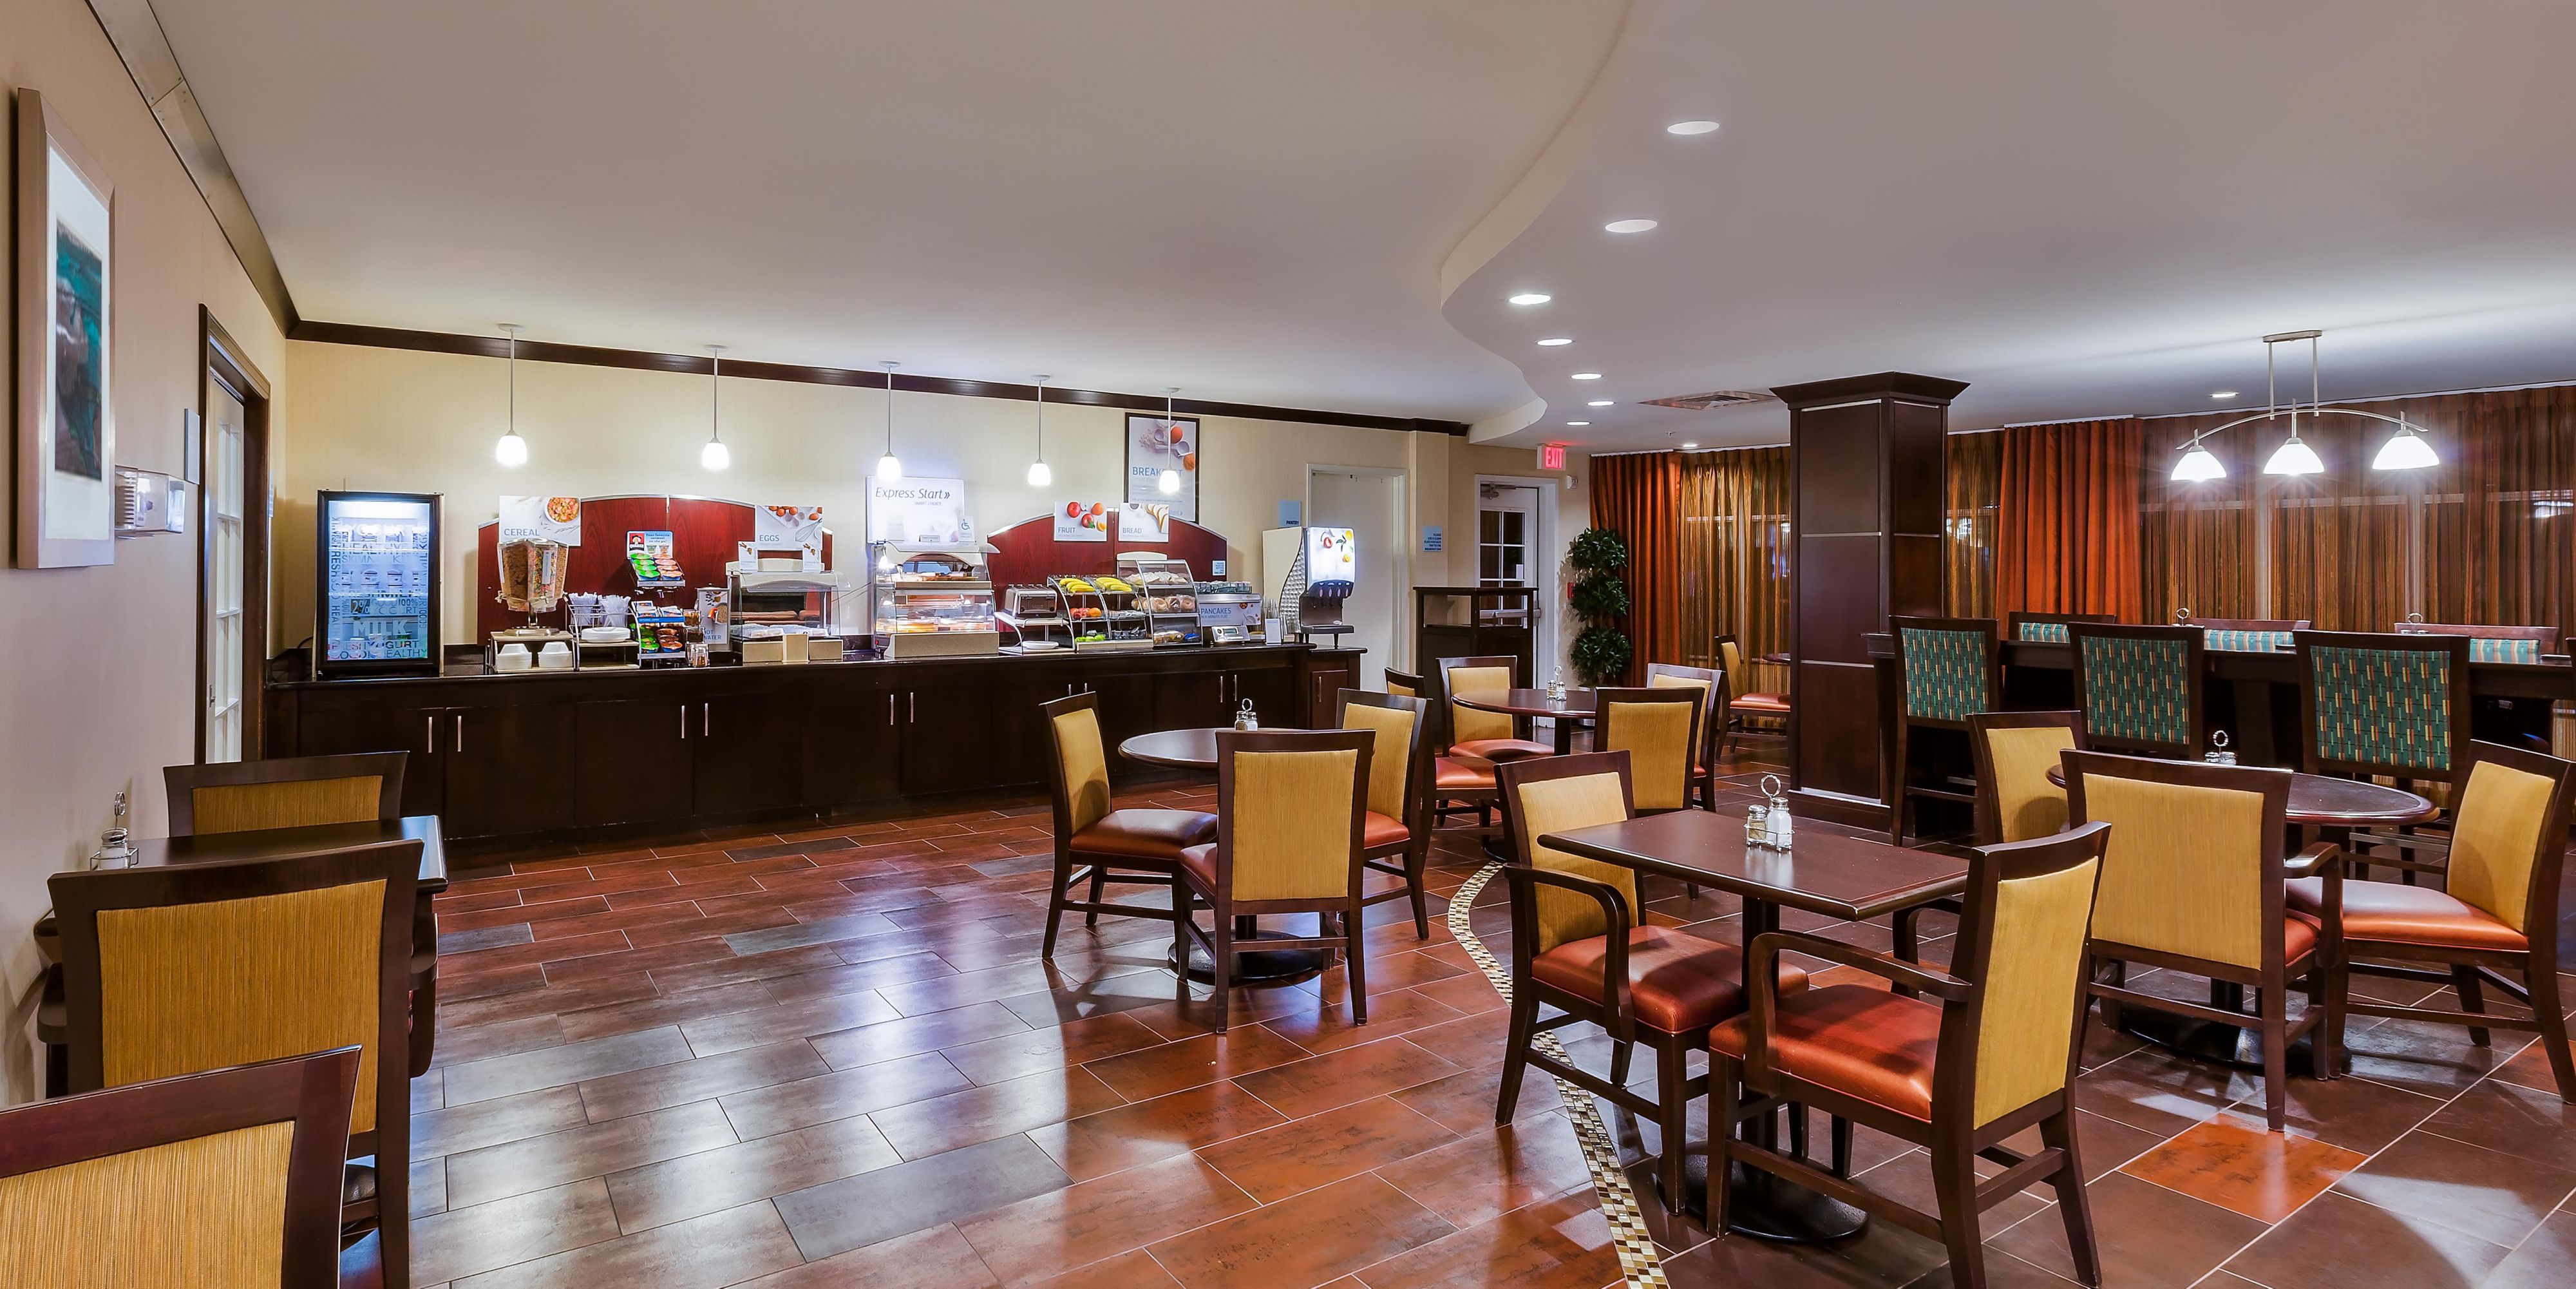 Join the Holiday Inn Express and Suites Alpine Southeast for our manager's reception Monday through Friday from 5 PM to 7 PM in our breakfast bar area. We offer snacks and beverages. We look forward to hosting you during your stay! * Dates and times are subject to change.